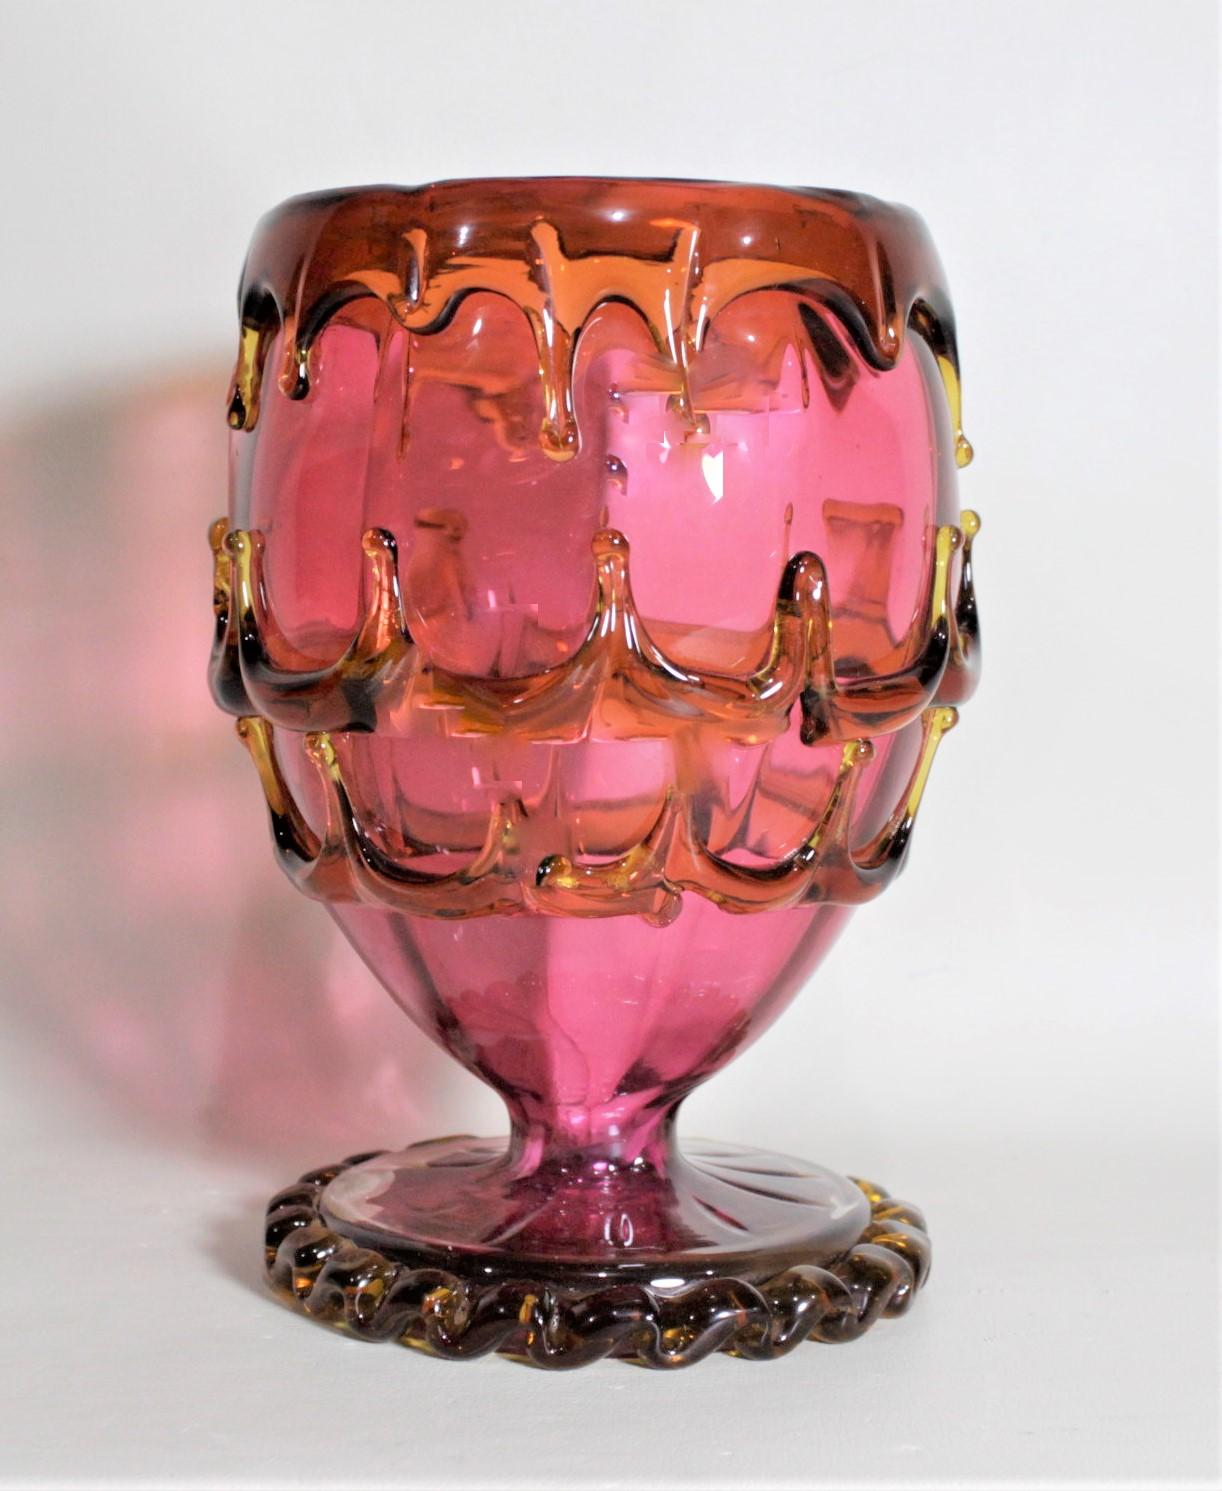 This antique chalice shaped cranberry pedestal vase is unmarked but believed to have been made in Bohemia in circa 1880. This footed vase is quite unique in that it has applied or draped deep orange or amber colored glass around the rim, center